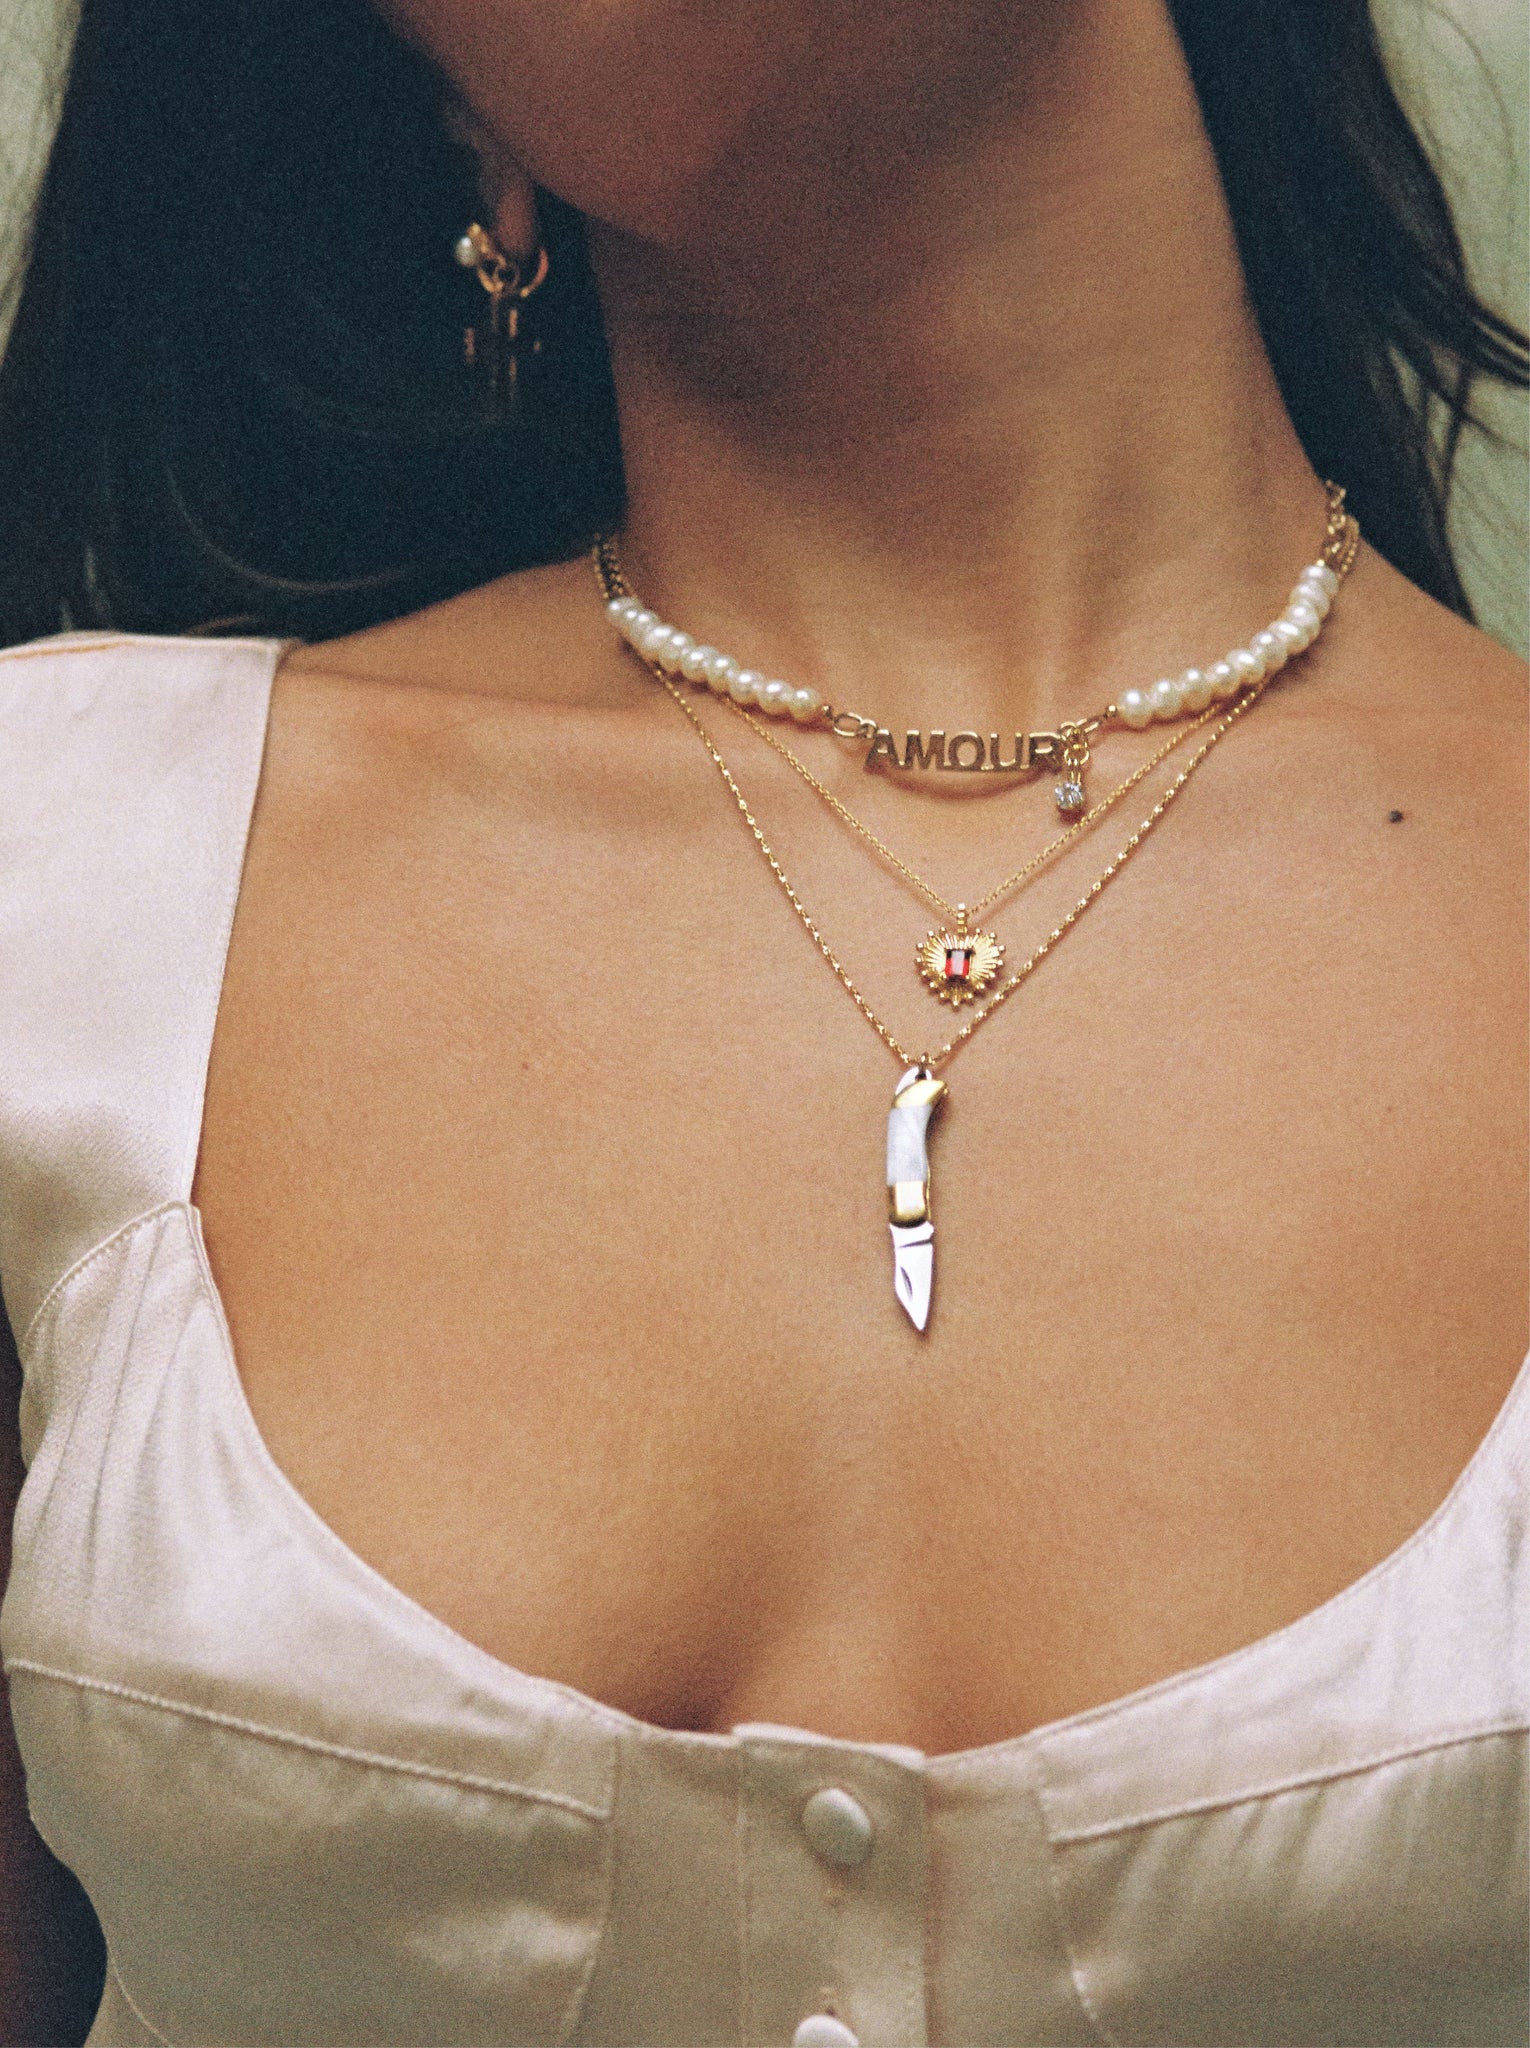 The Amour Charm Necklace